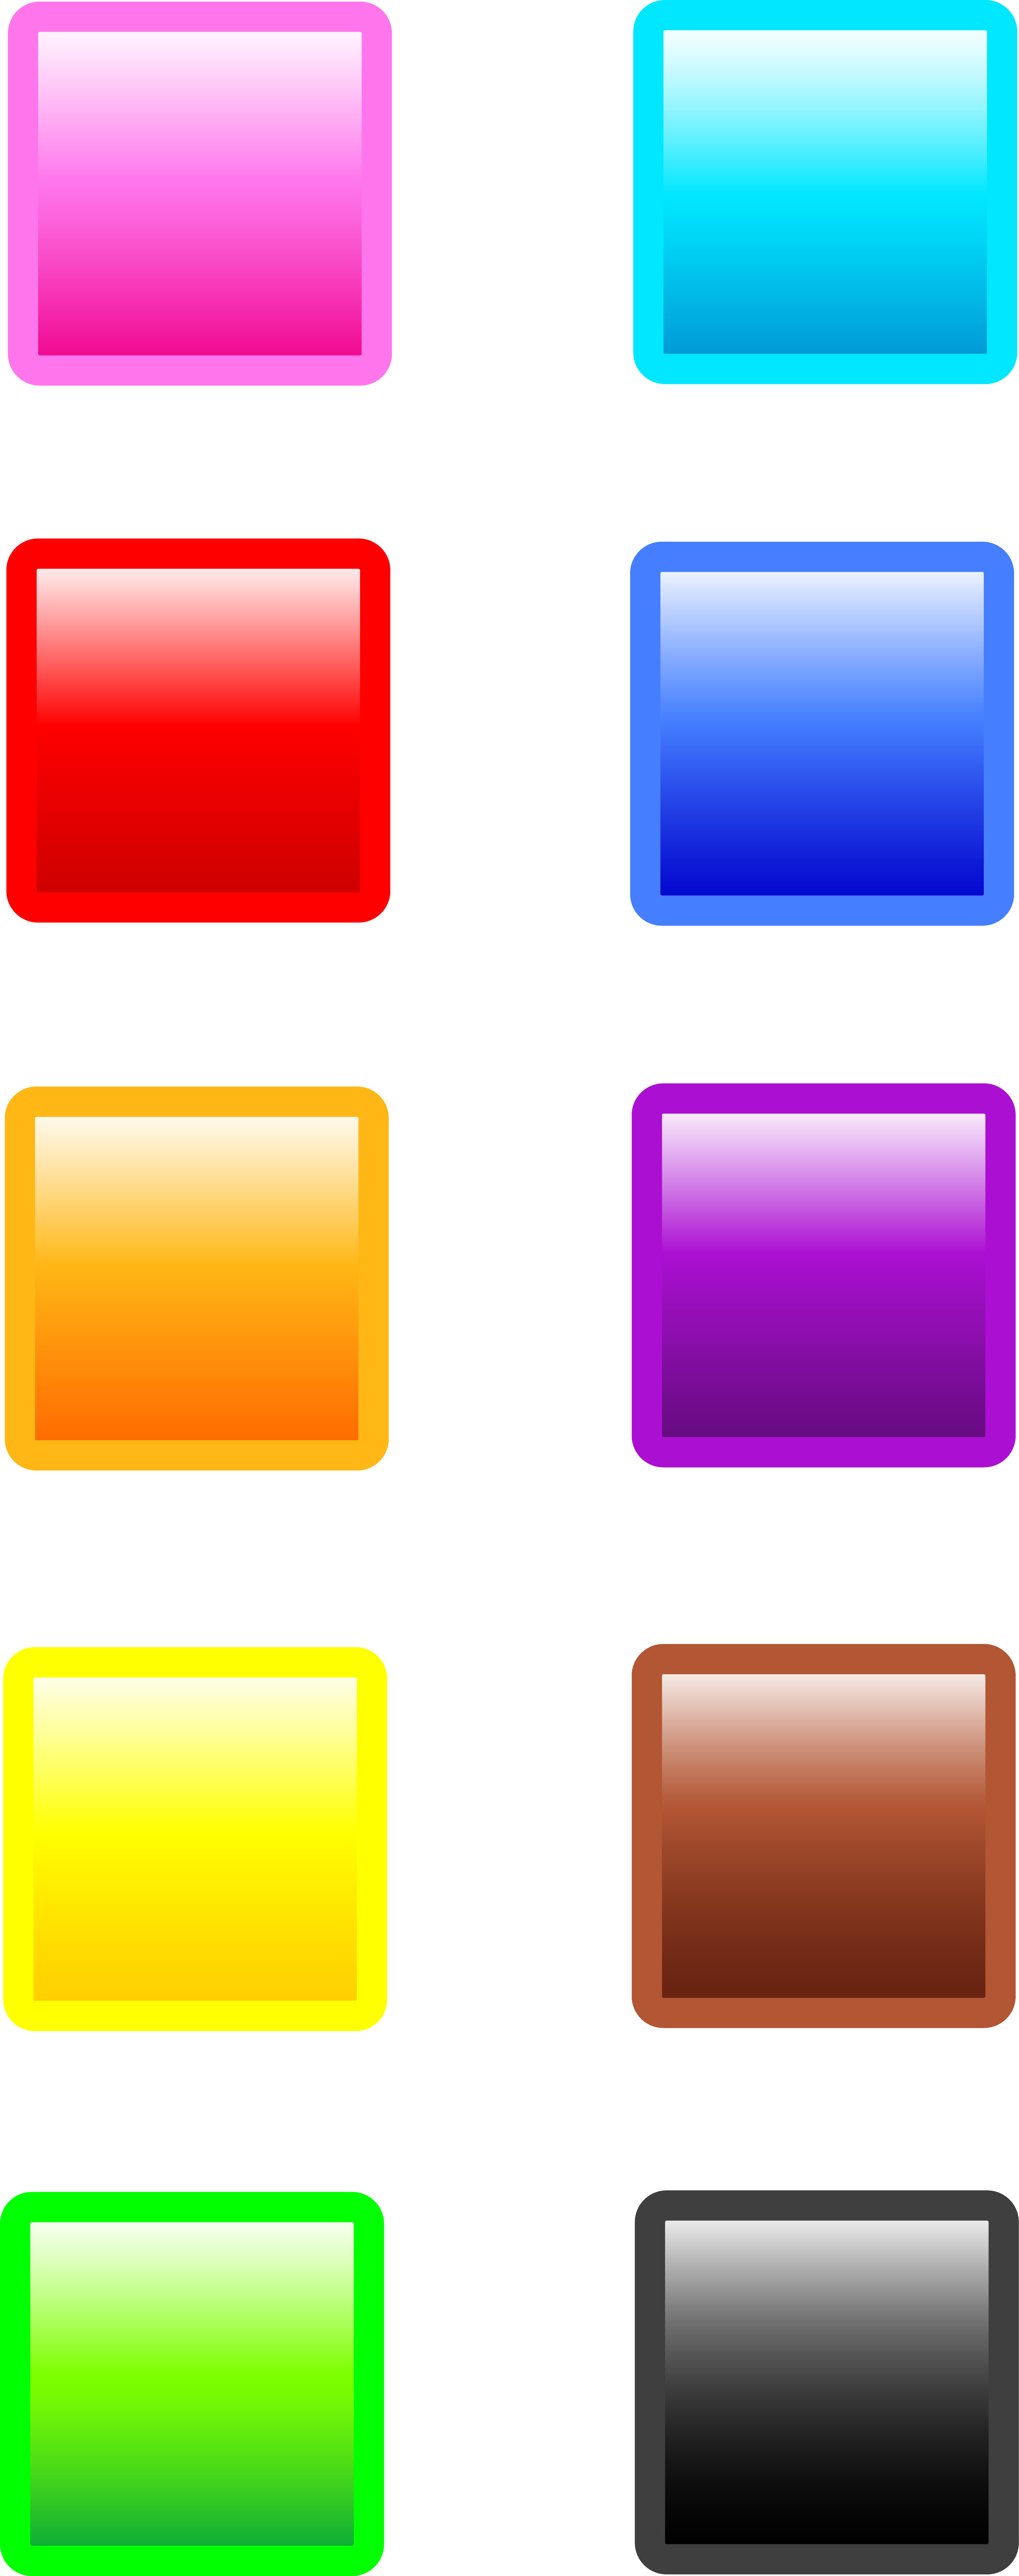 Free Squares Clipart square object, Download Free Clip Art